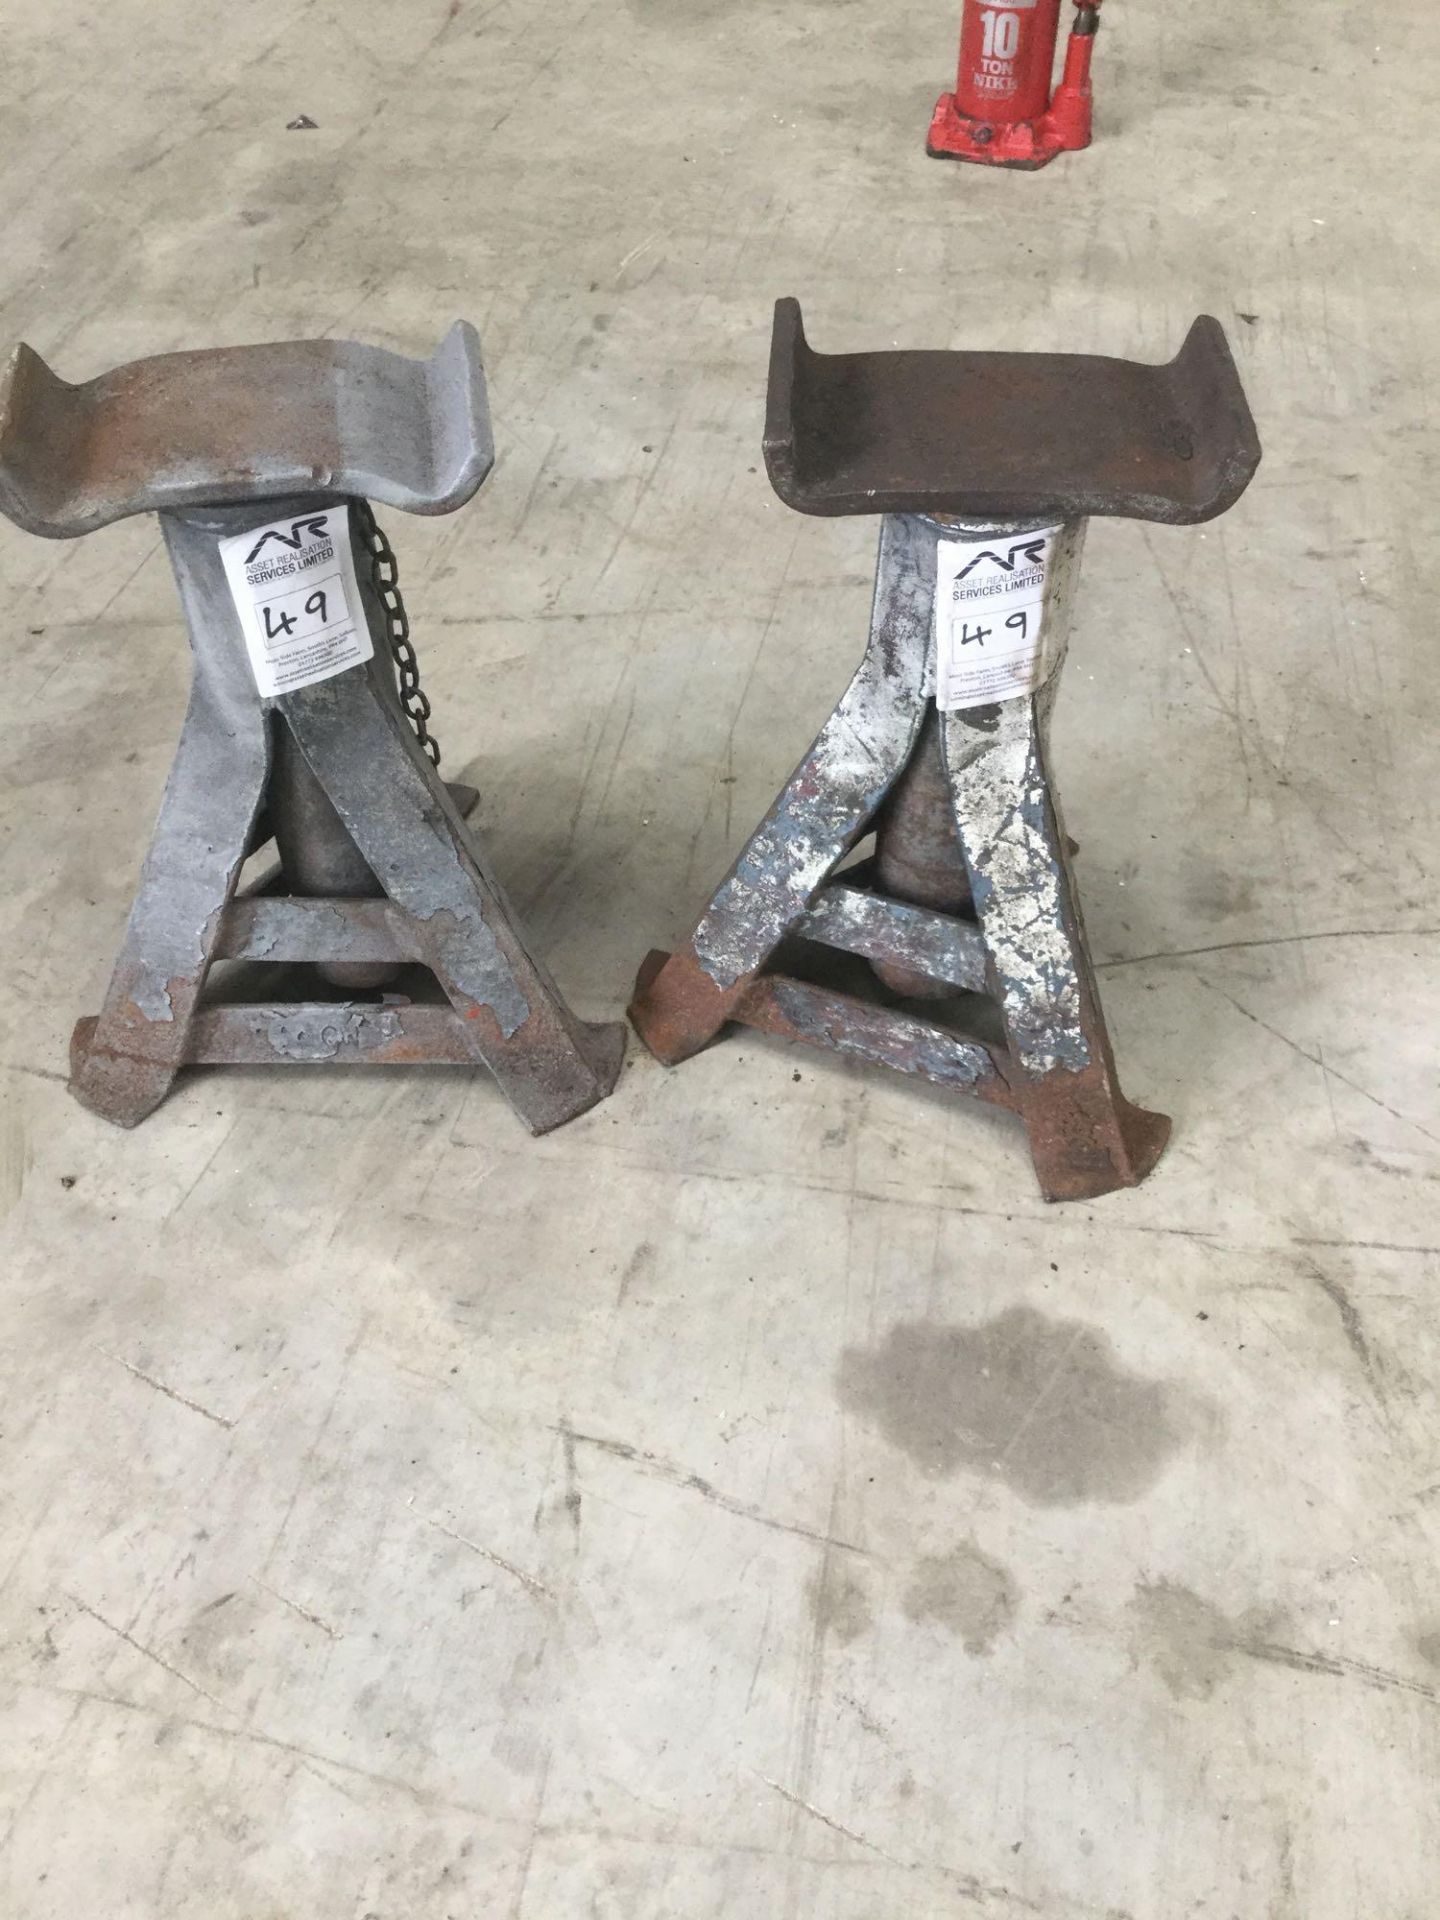 Axle stands